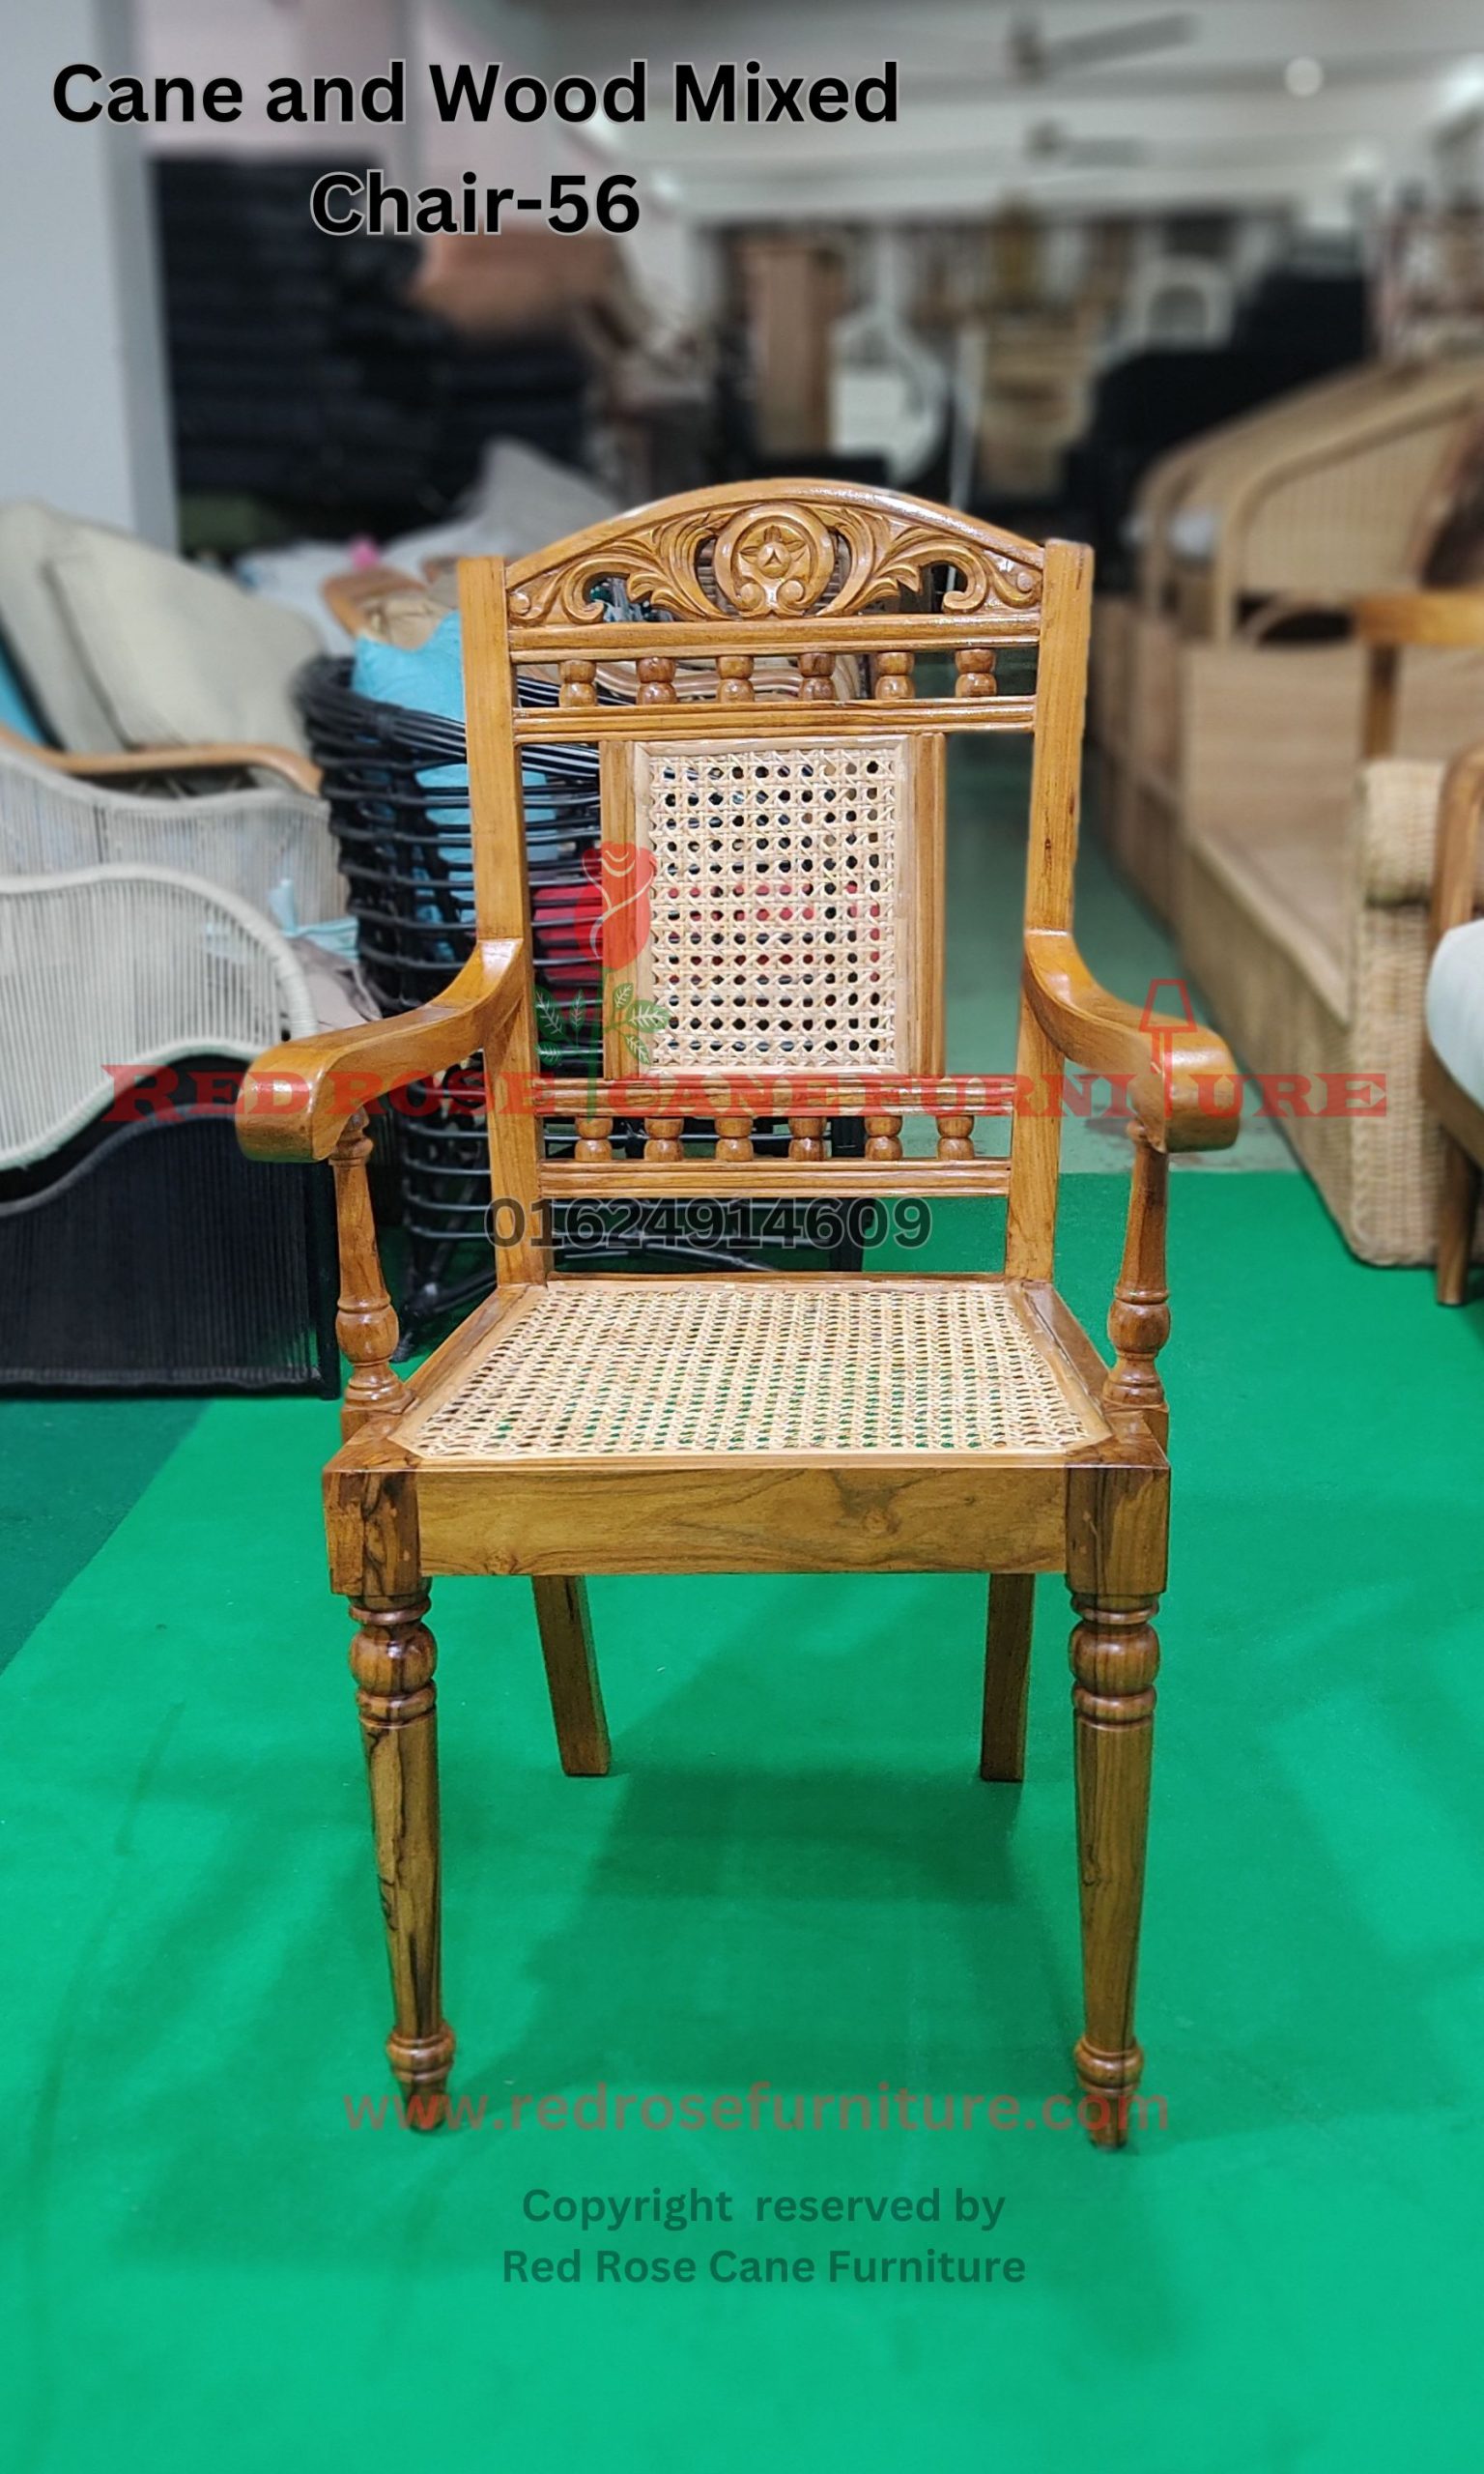 Cane and Wood Mixed Chair-56